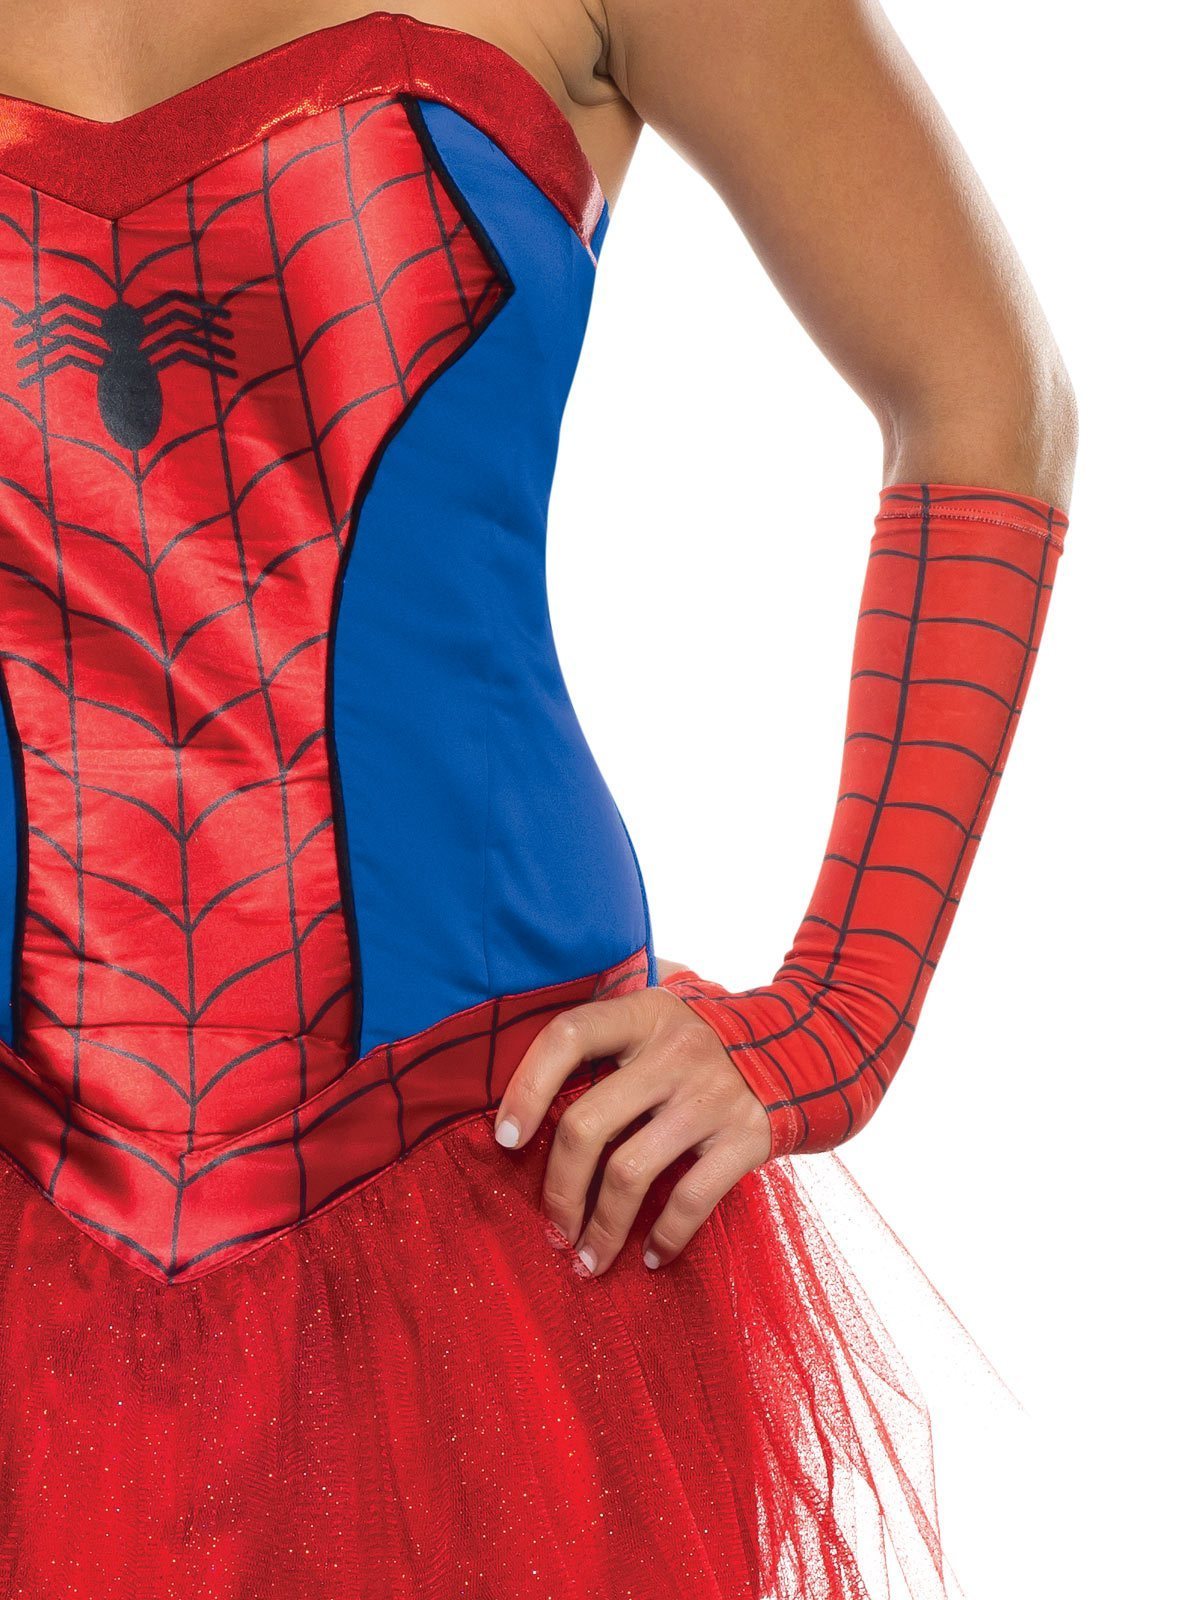 Spider-Lady Costume for Adults - Marvel Spider-Girl